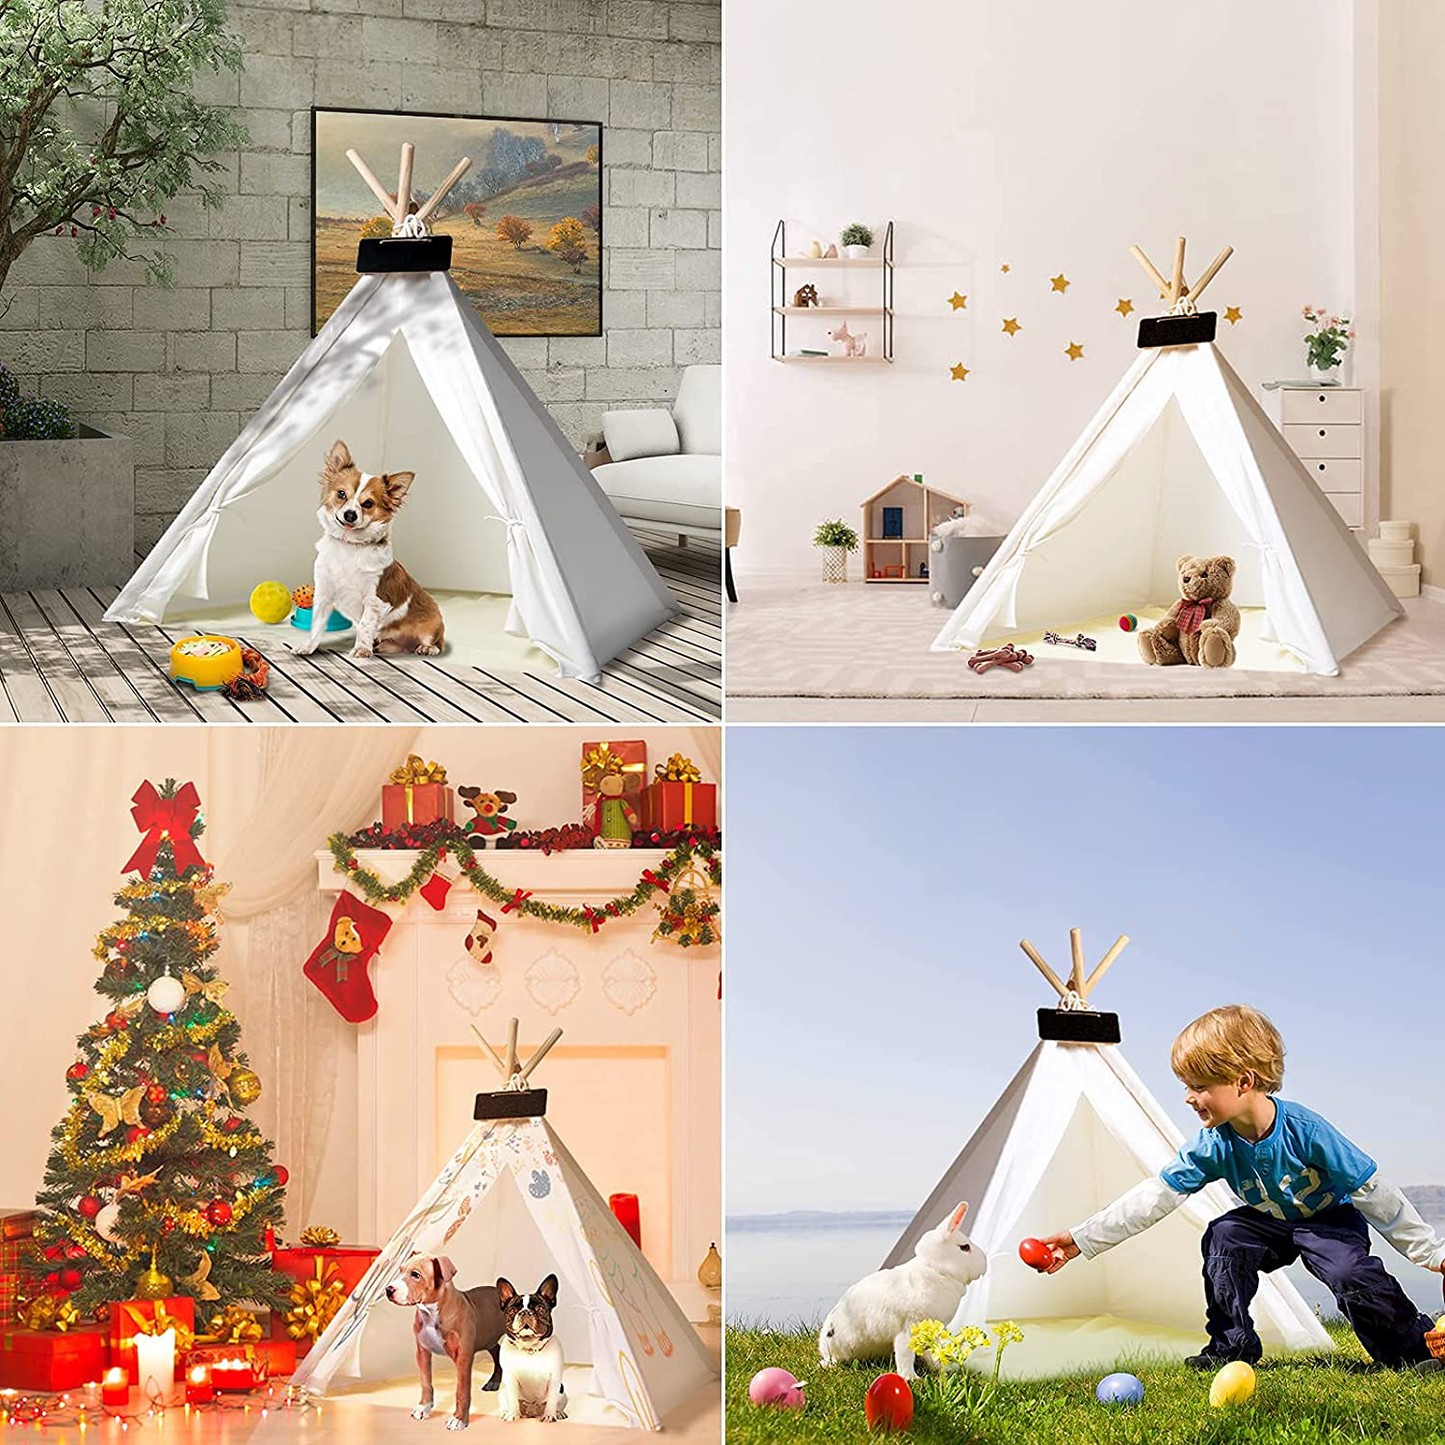 IREENUO Pet Teepee Tent for Dogs Cats, 33Inches Medium Size Dogs Tent House for Small Medium Dogs with Durable Material